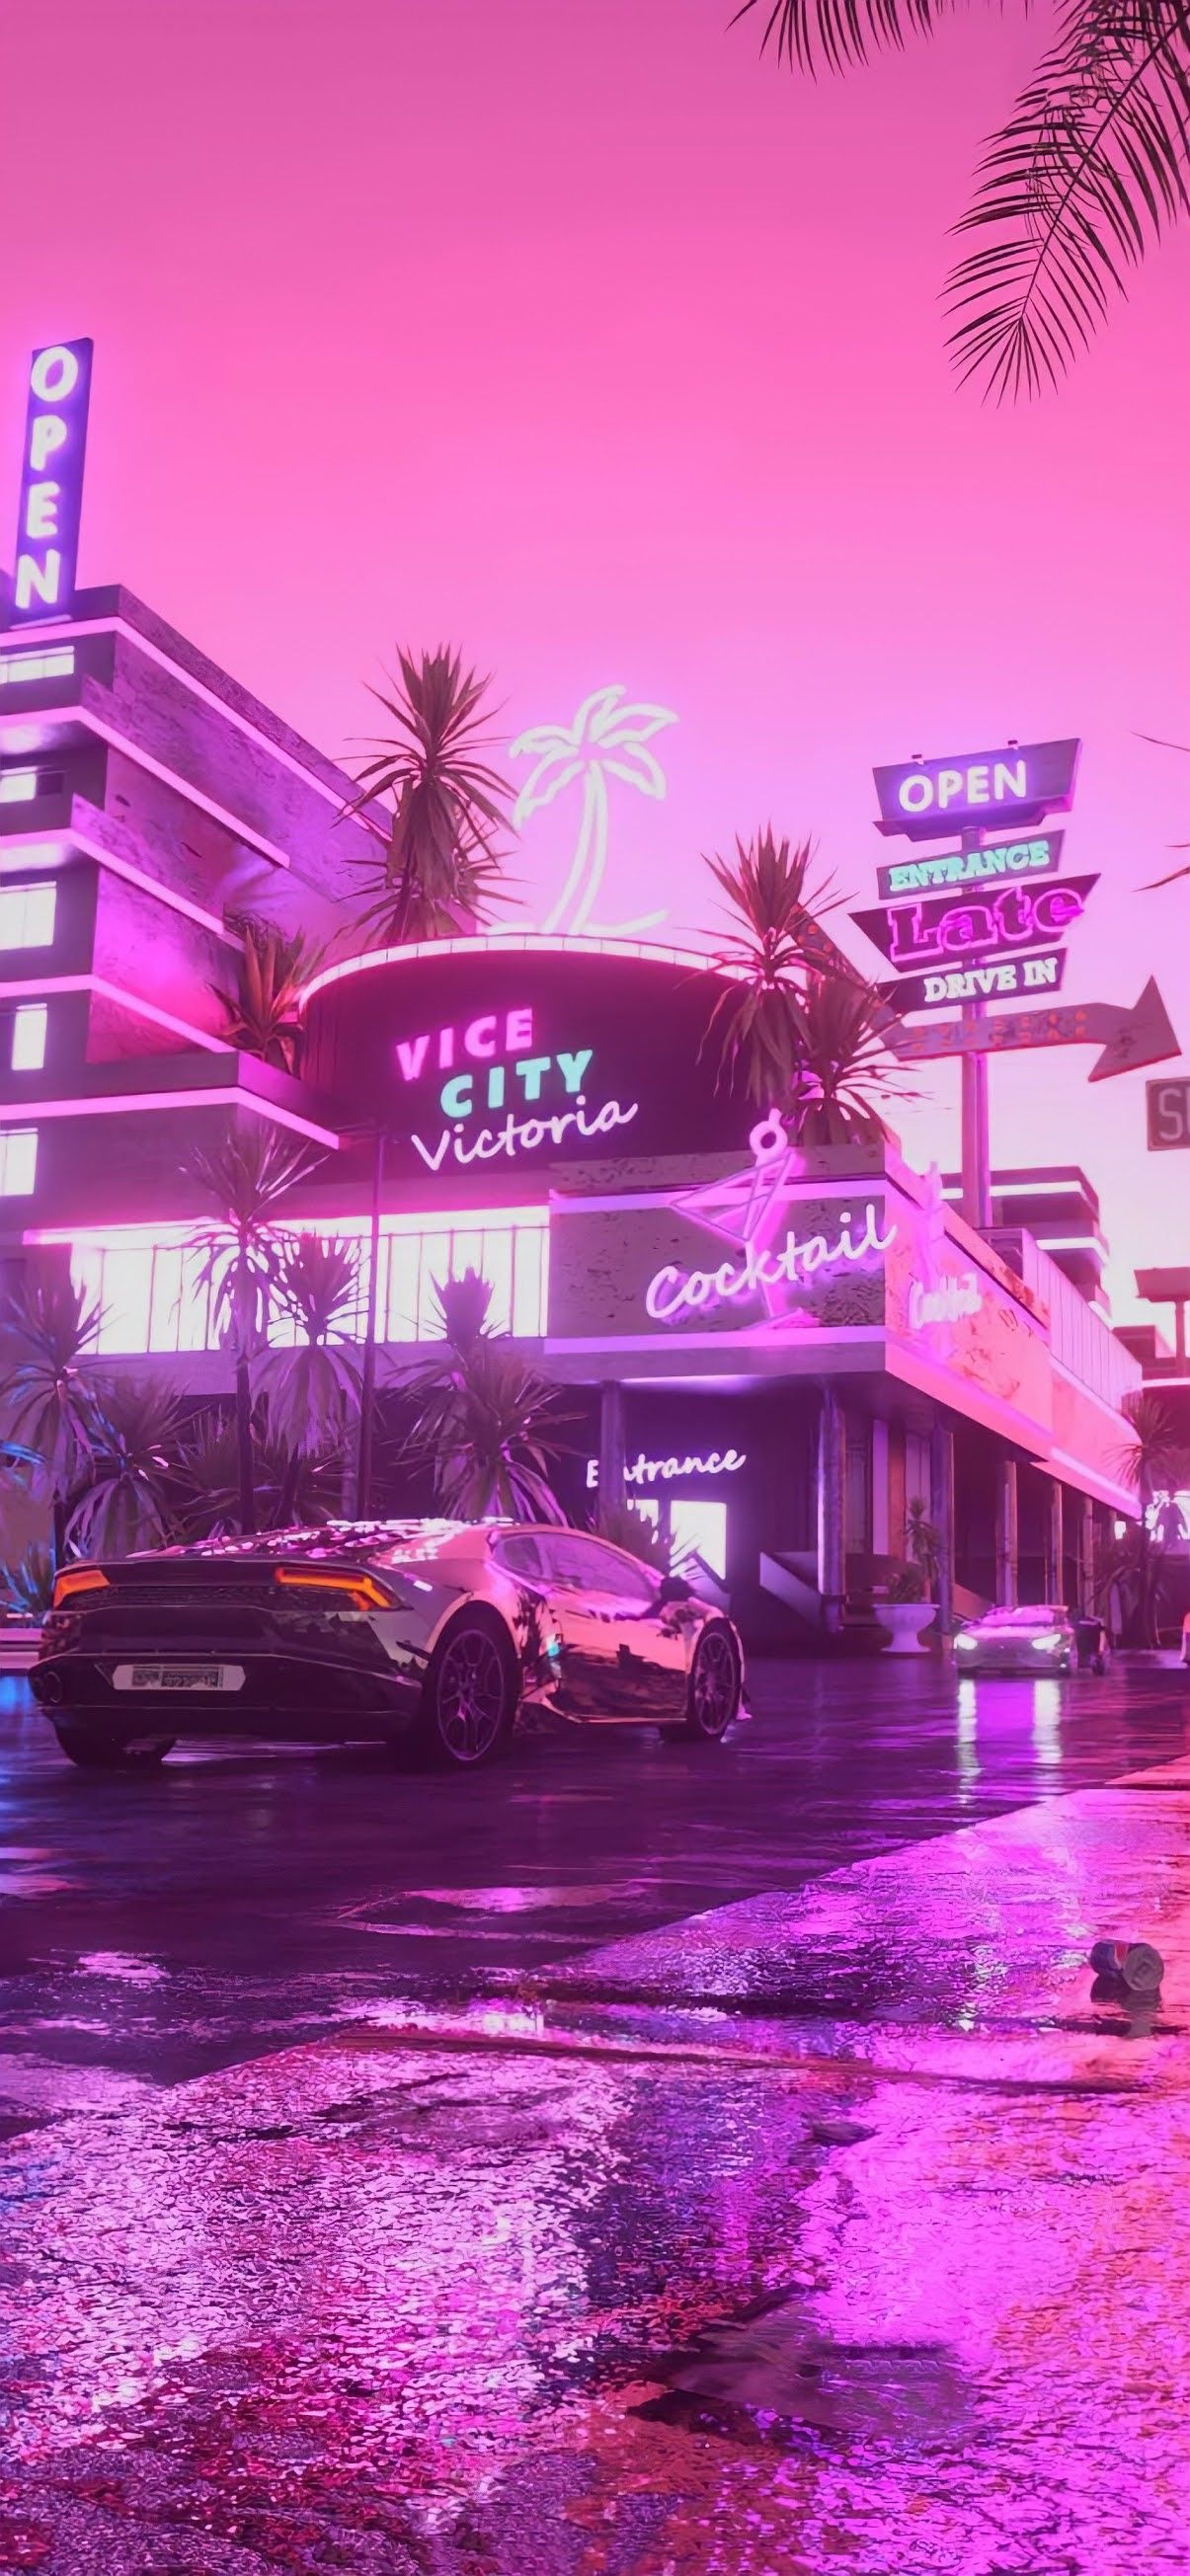 Vice city wallpaper for mobiles and tablets - Purple, vaporwave, Miami, pink